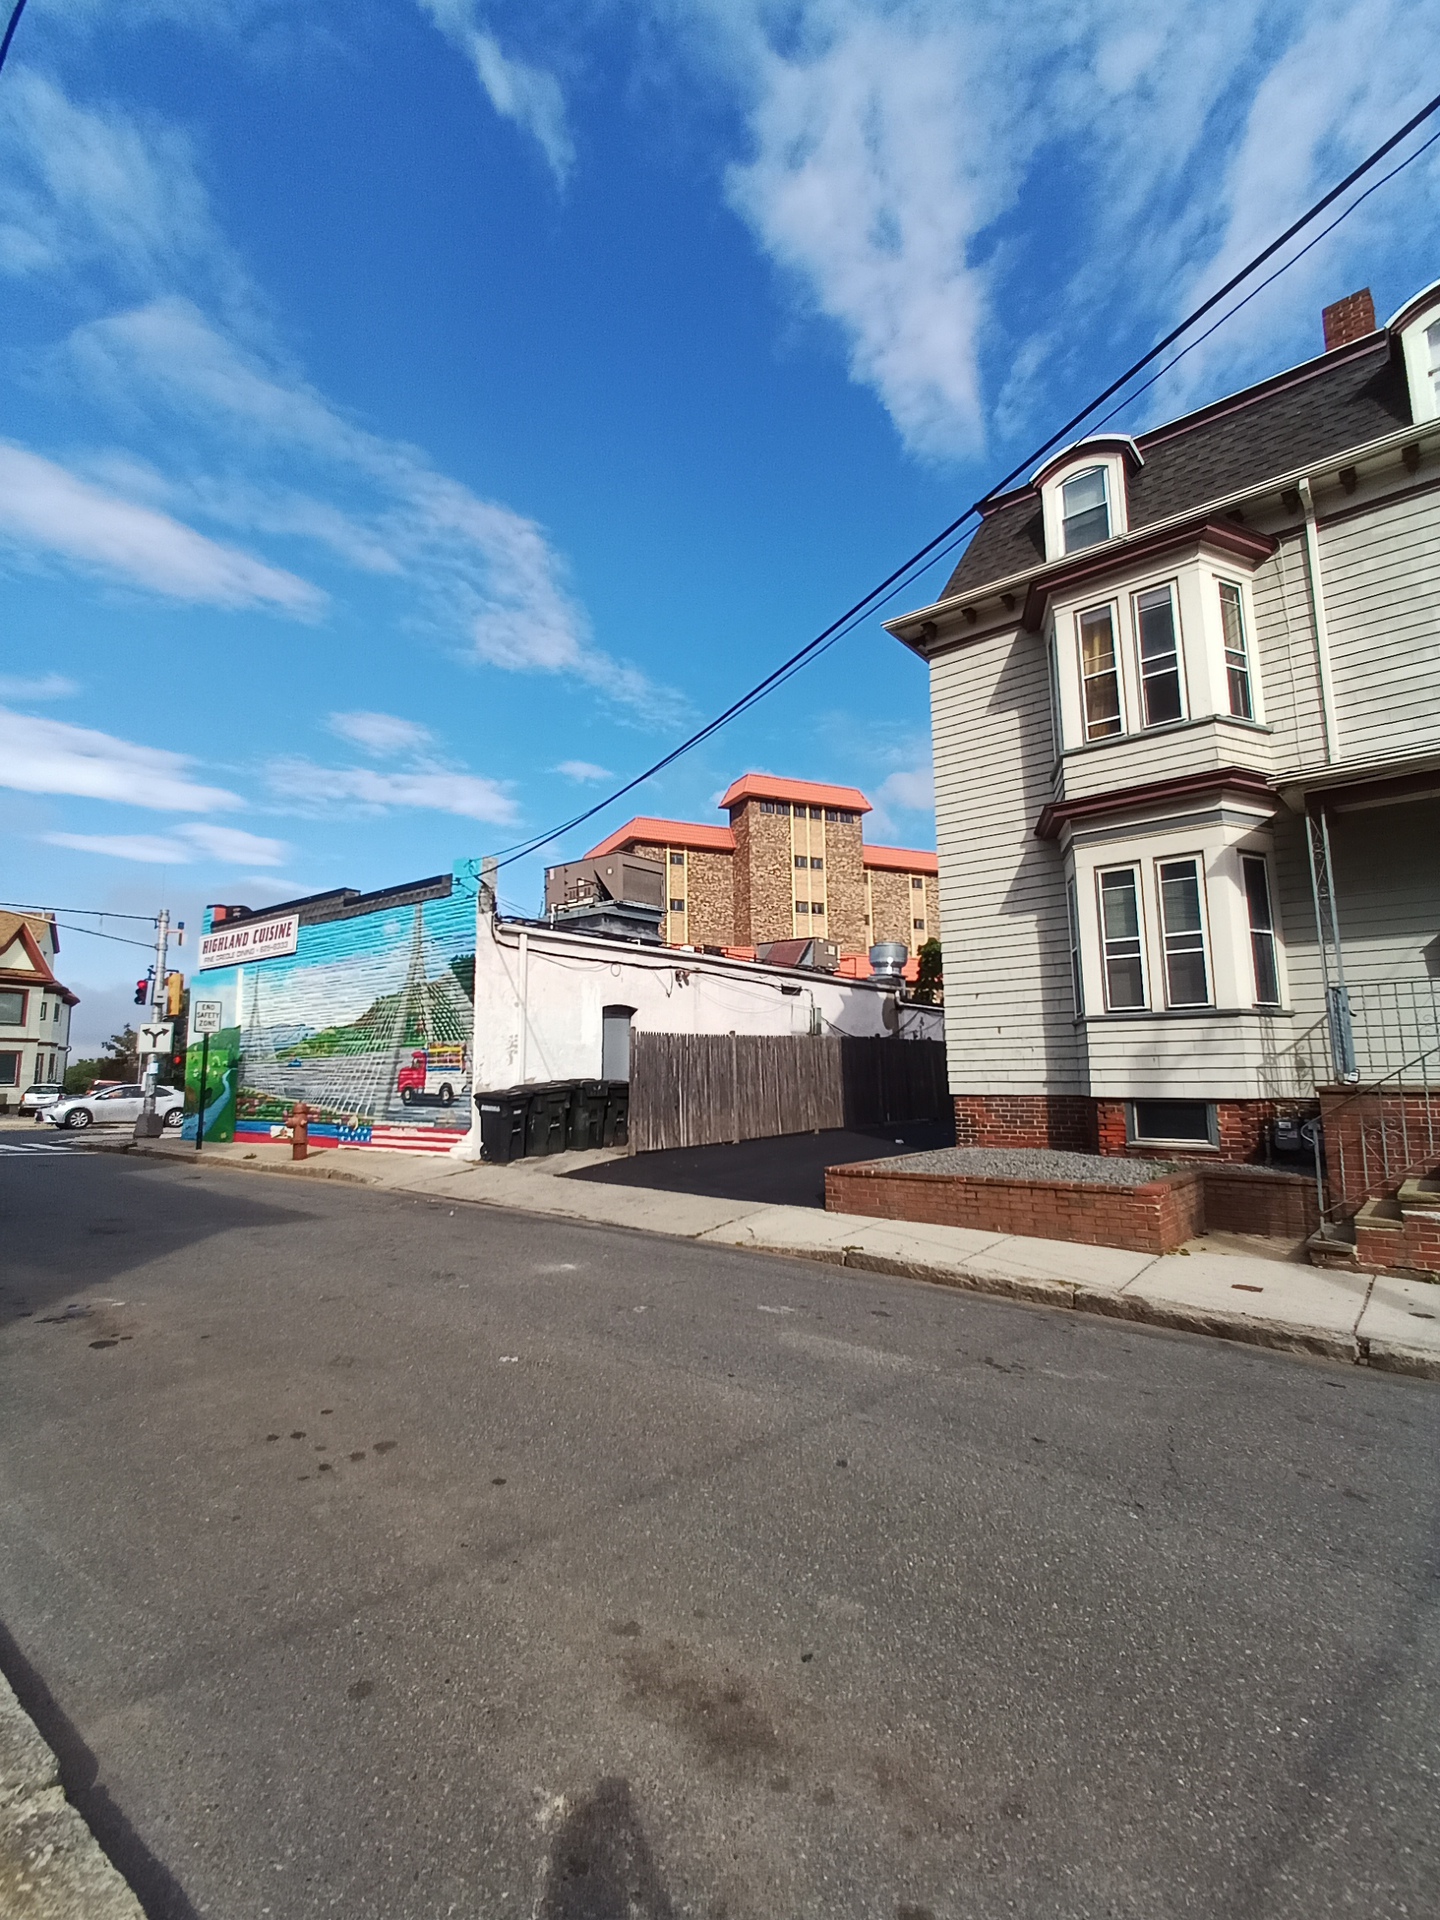 Picture of exterior of house and street in Massachusetts taken on Blu G91 Pro